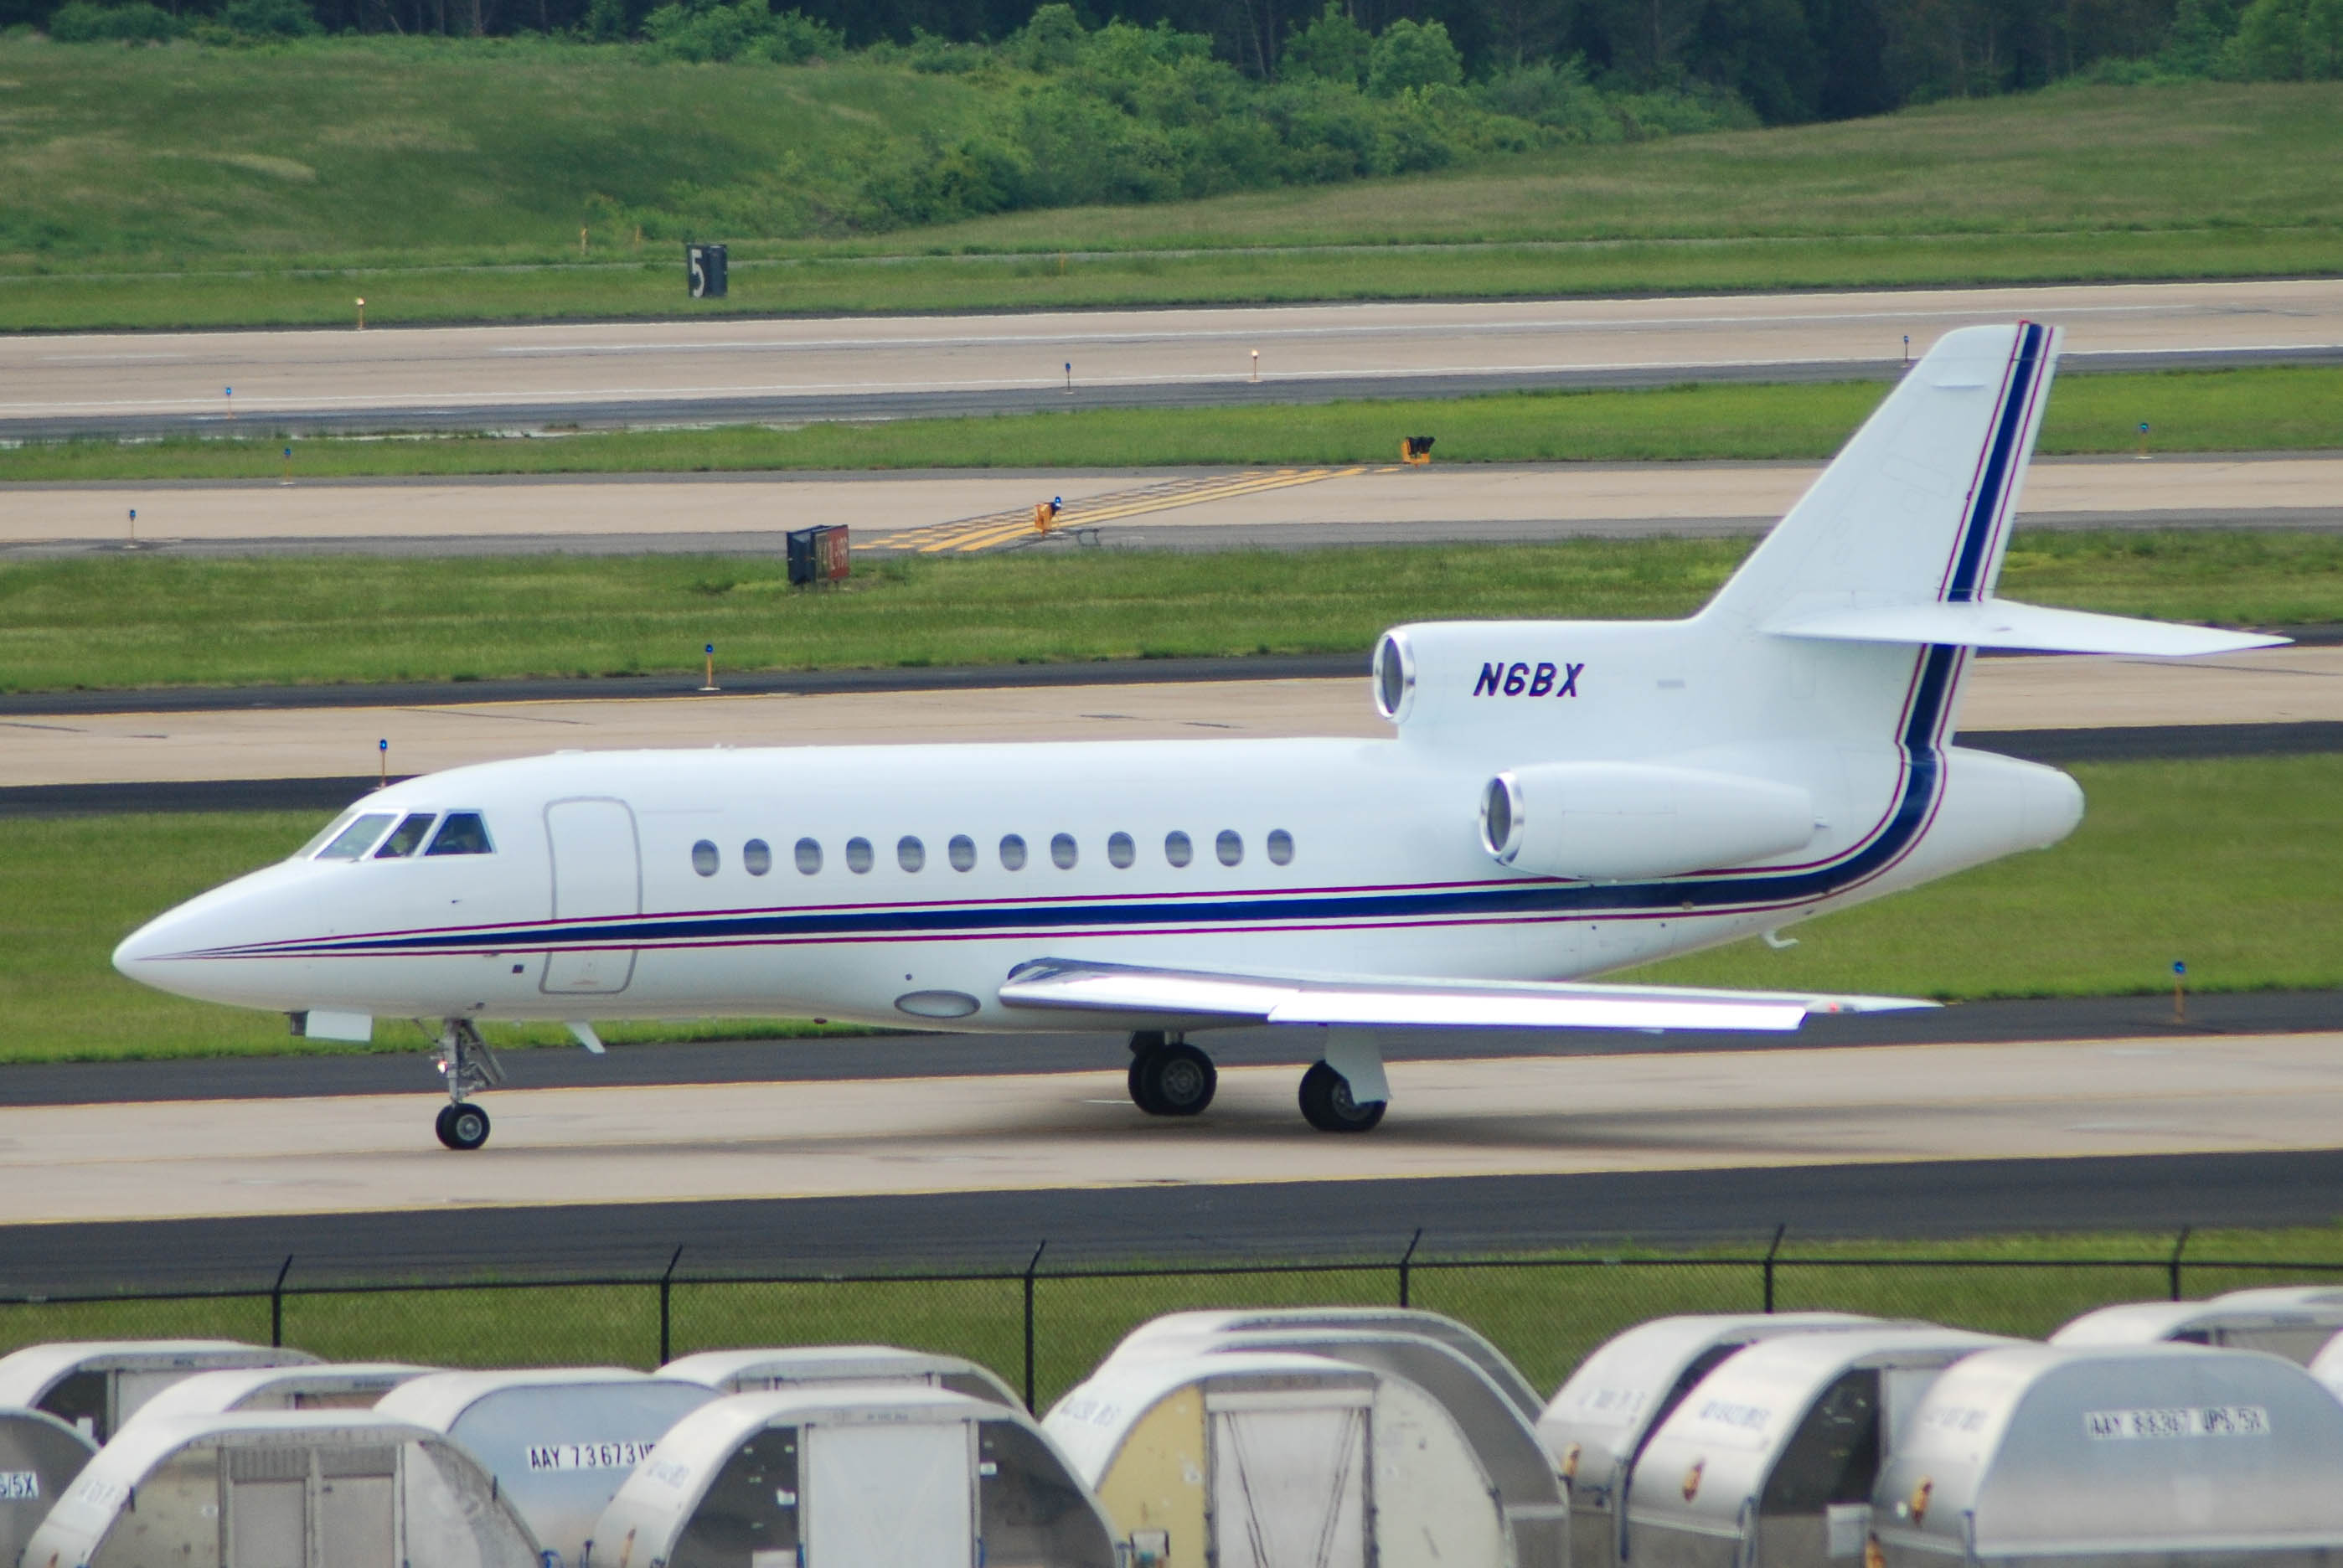 N800DW/N800DW Corporate Dassault Falcon 900 Airframe Information - AVSpotters.com